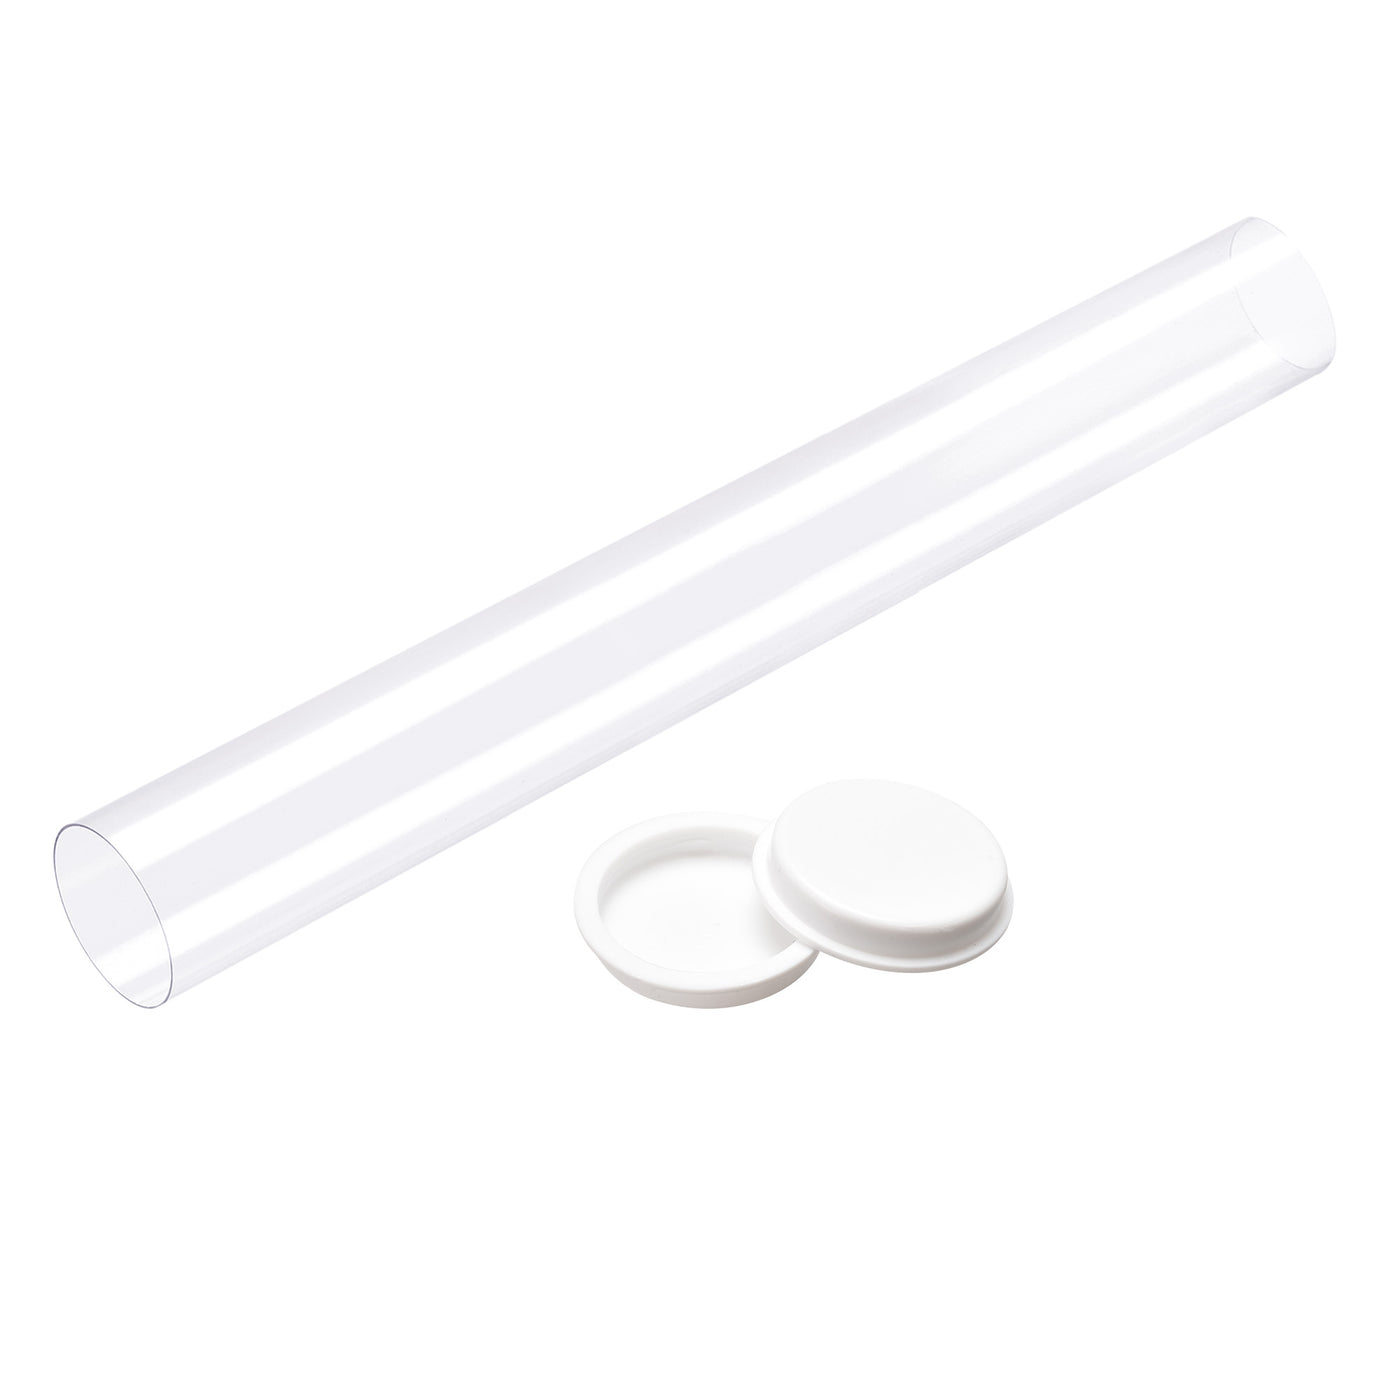 uxcell Uxcell Polycarbonate Rigid Round Clear Tubing 26mm(1 Inch)IDx28mm(1.1 Inch)ODx300mm(11.8 Inch) Length Plastic Storage Transparent Tube with White Lids